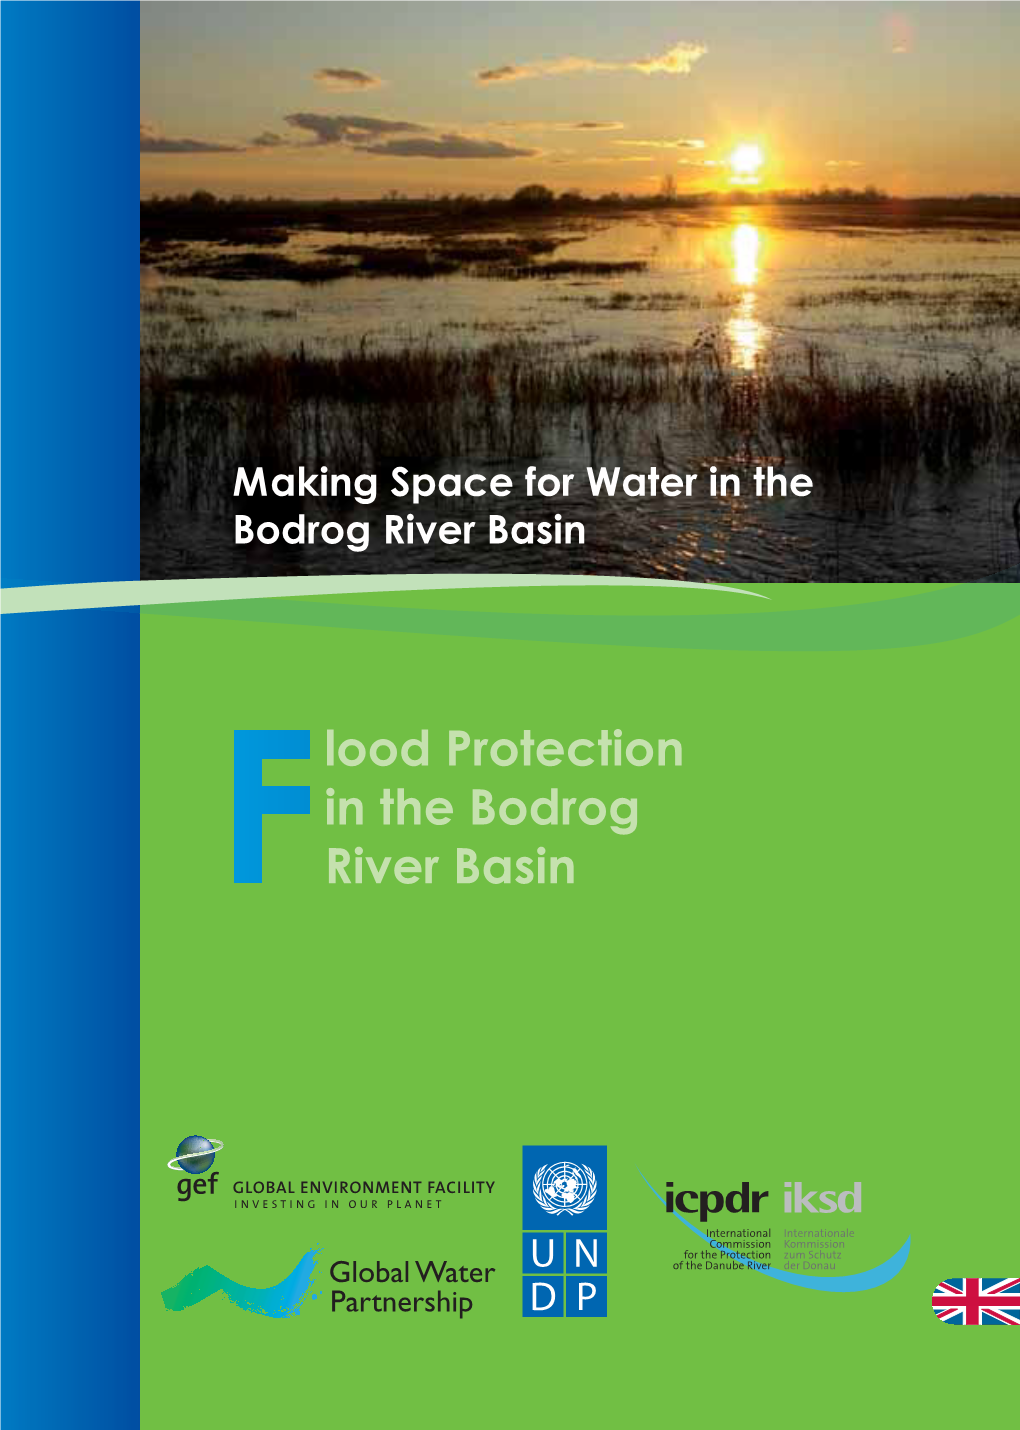 Lood Protection in the Bodrog River Basin